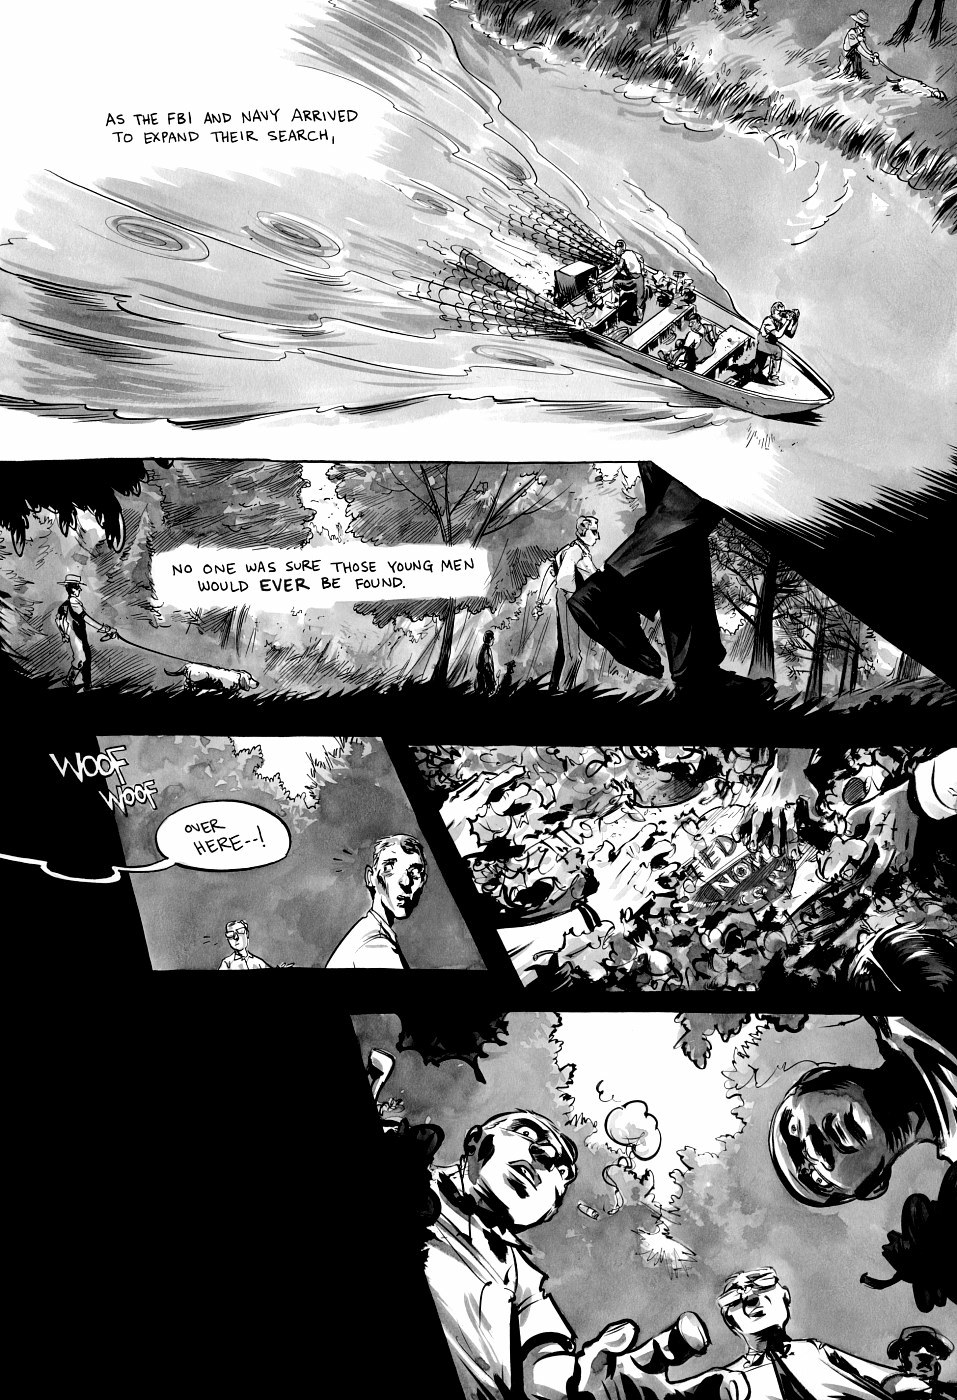 page 83 of march book three graphic novel